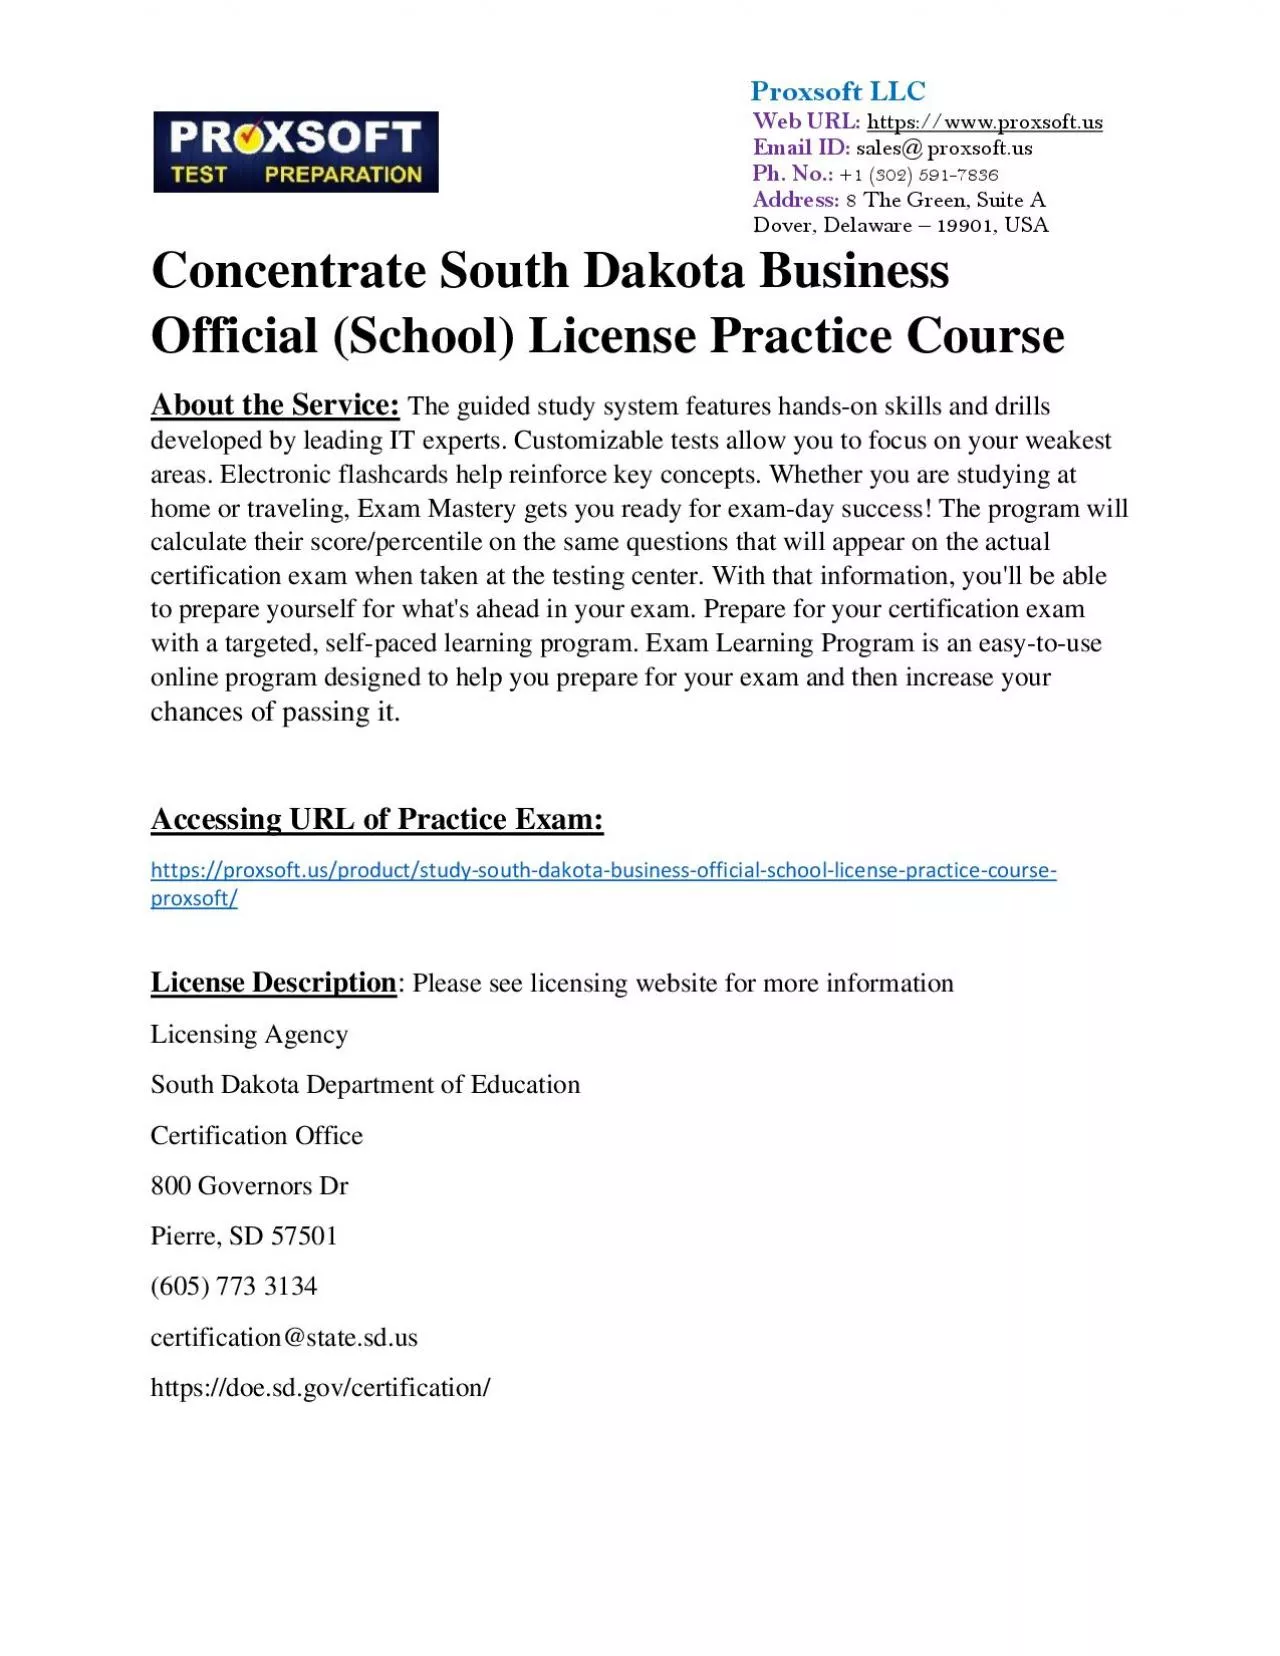 Concentrate South Dakota Business Official (School) License Practice Course